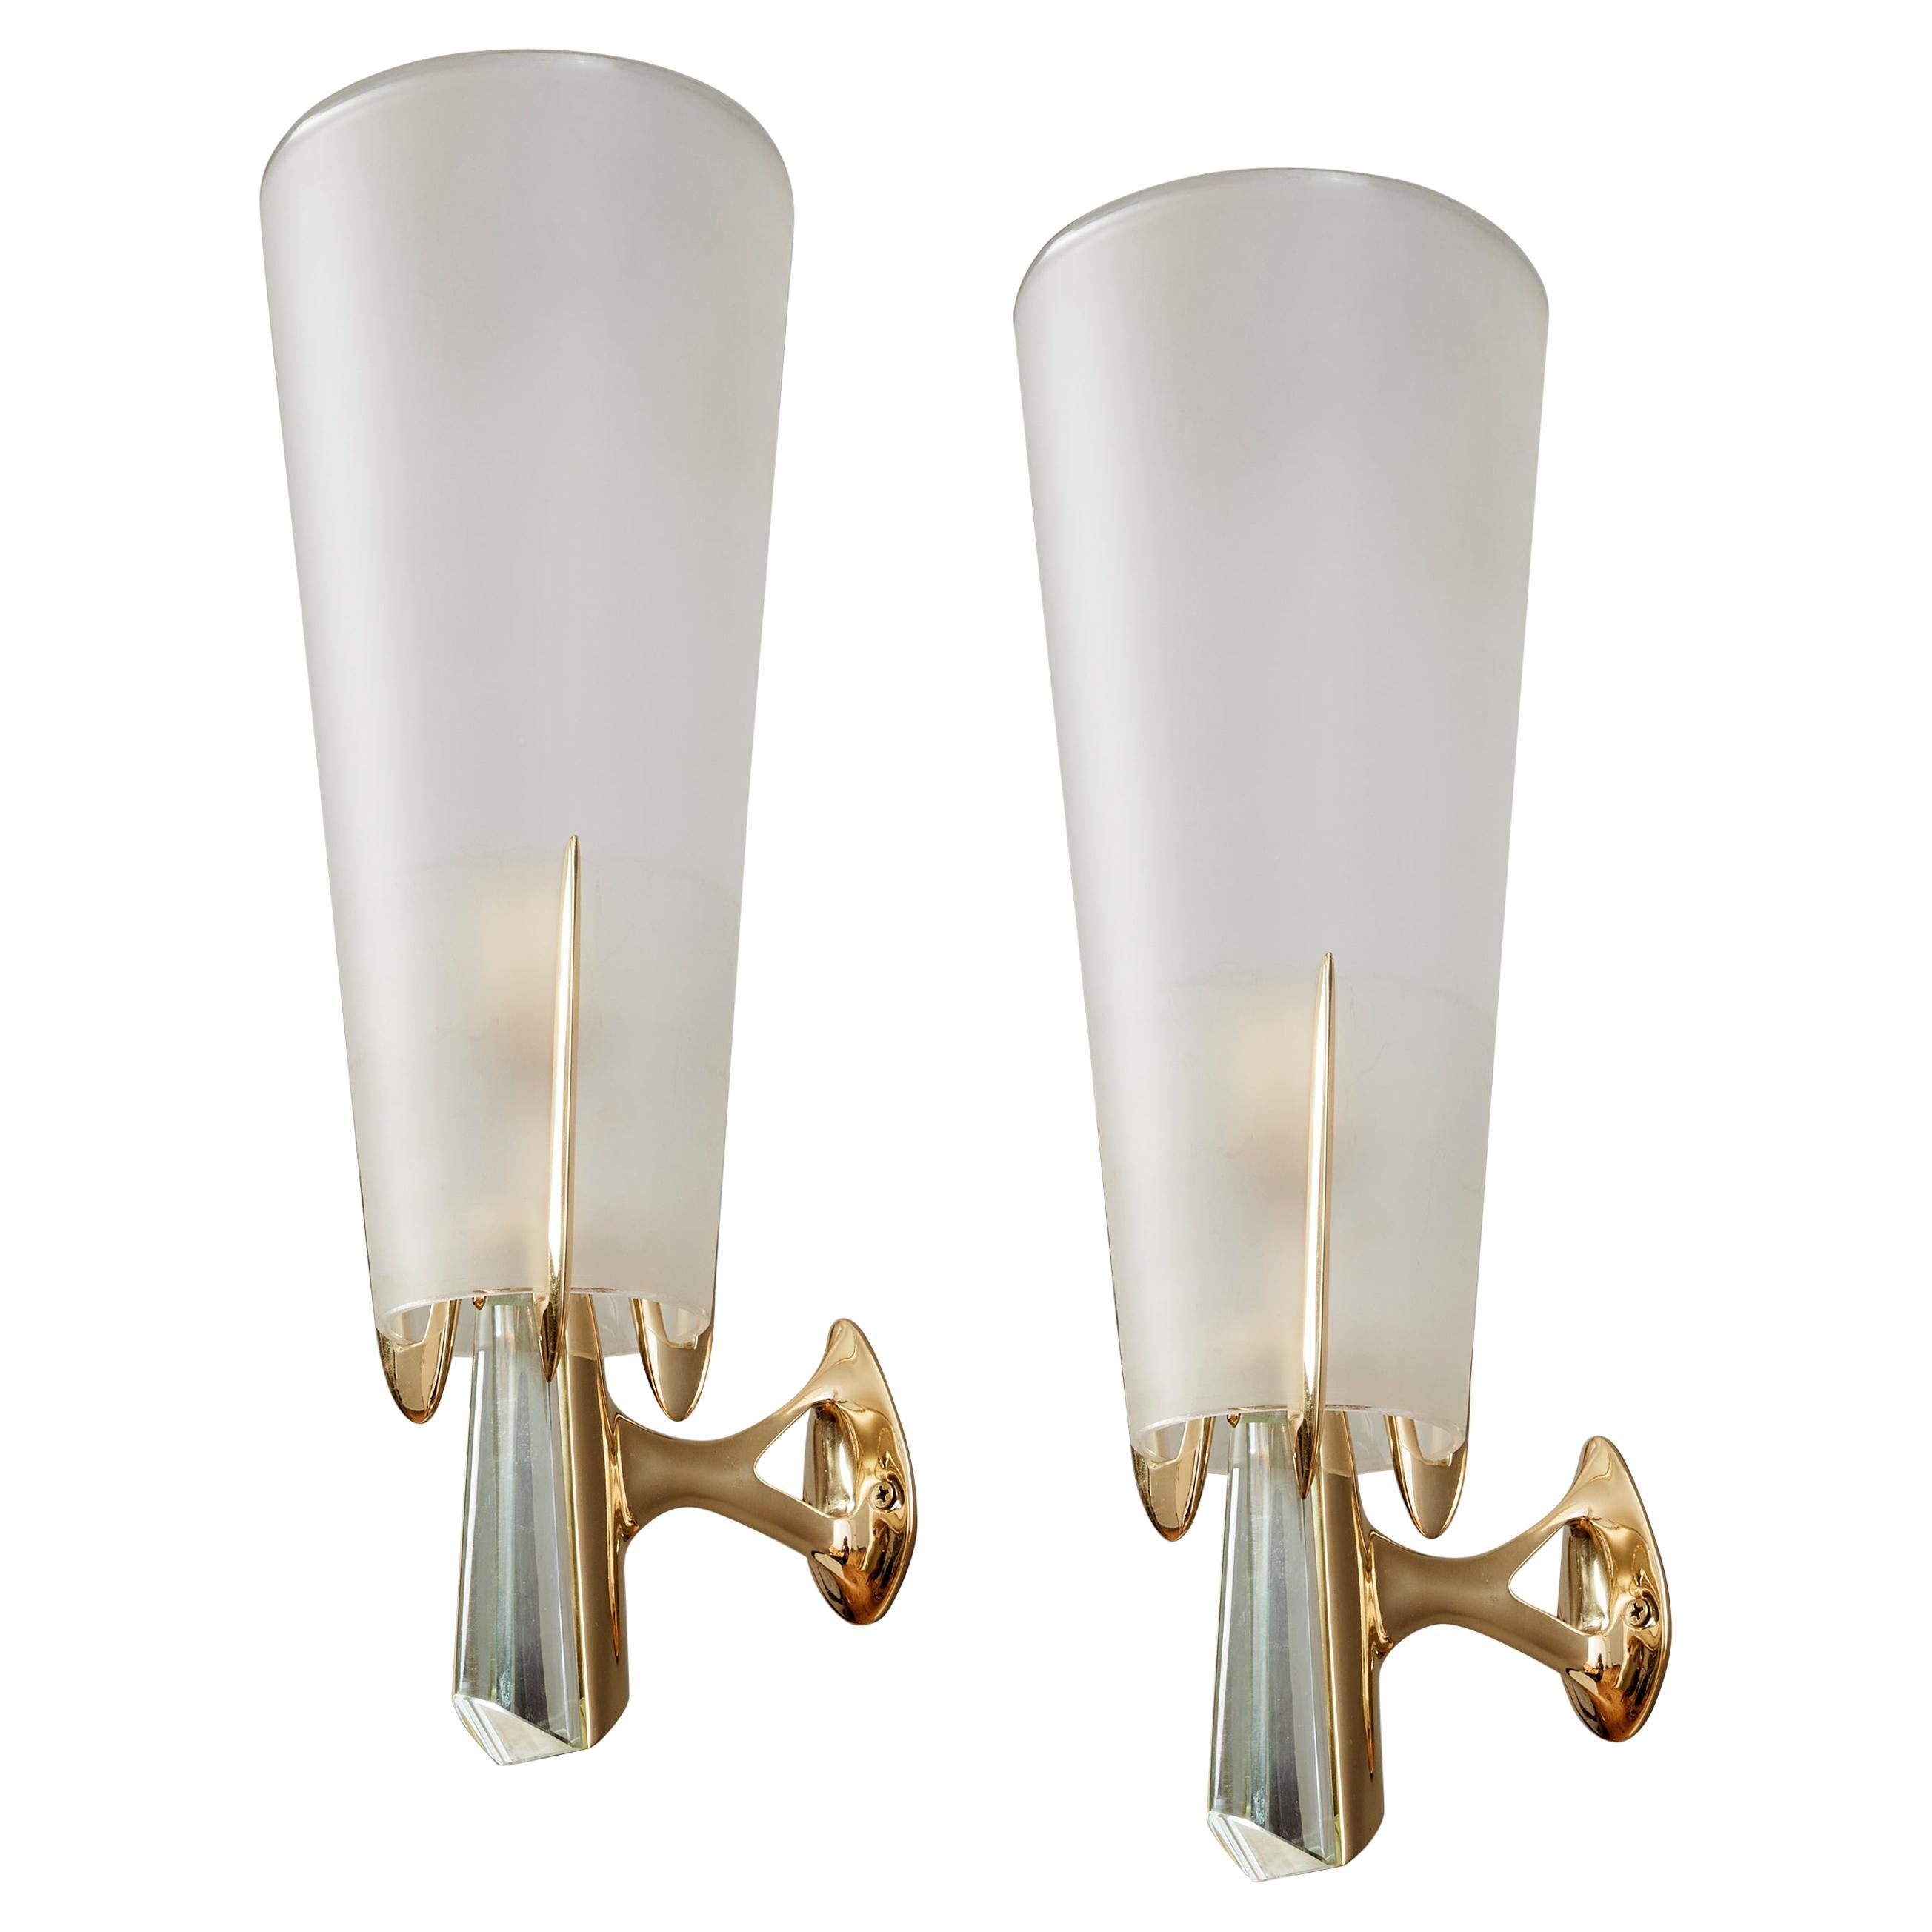 Max Ingrand for Fontana Arte: Rare Sconces in Brass and Crystal, Italy 1955